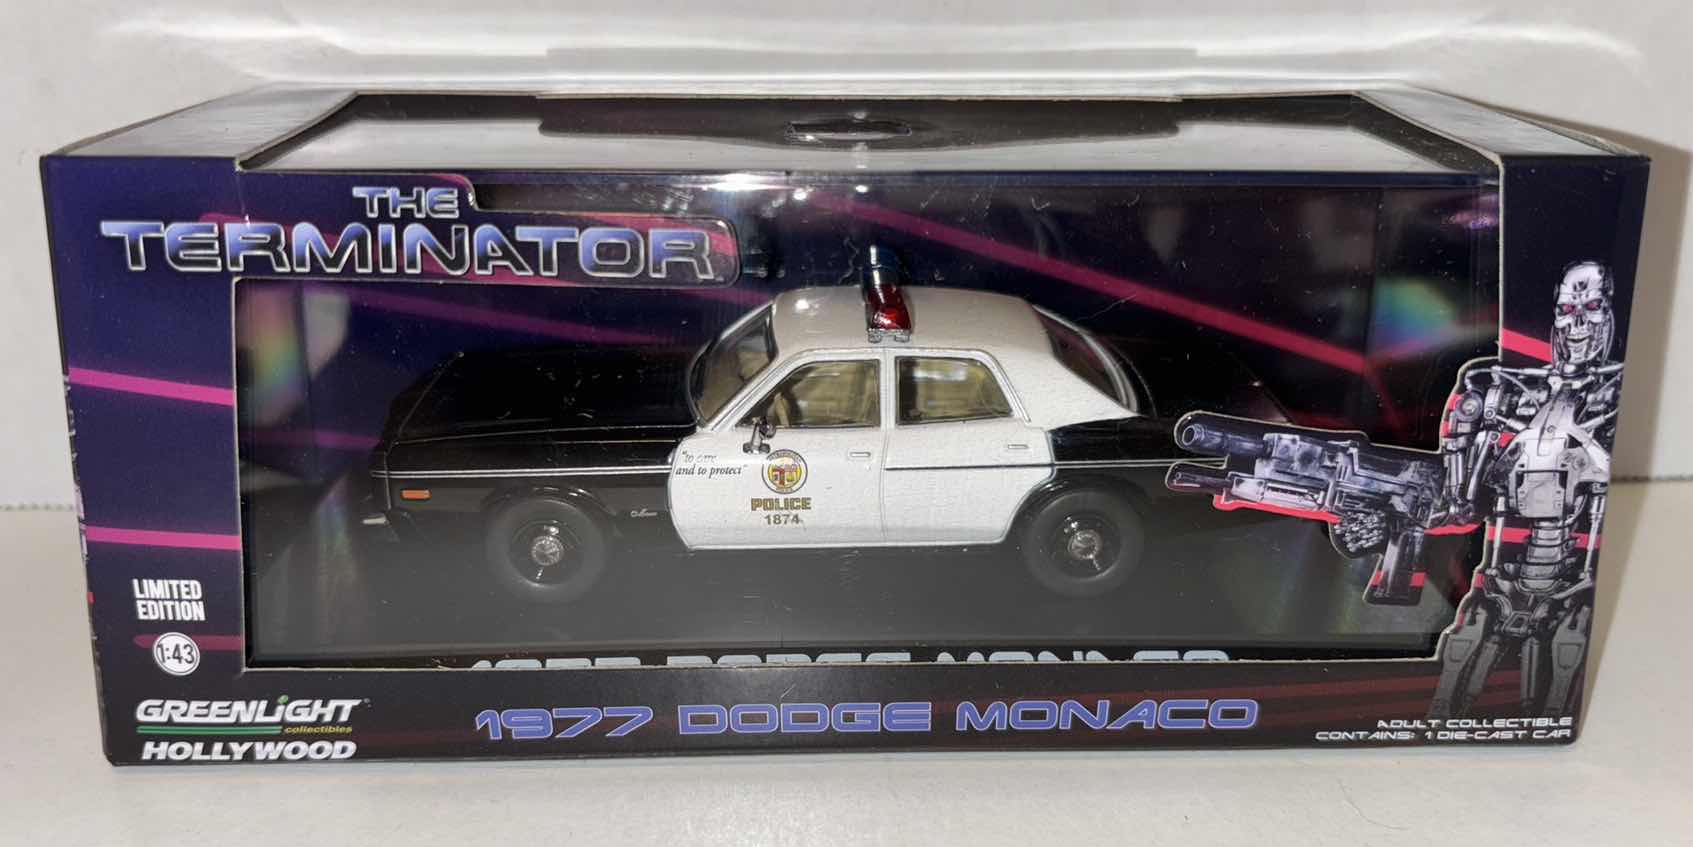 Photo 1 of NEW GREENLIGHT COLLECTIBLES HOLLYWOOD RIDES LIMITED EDITION 1:43 SCALE “THE TERMINATOR 1977 DODGE MONACO” DIE-CAST VEHICLE